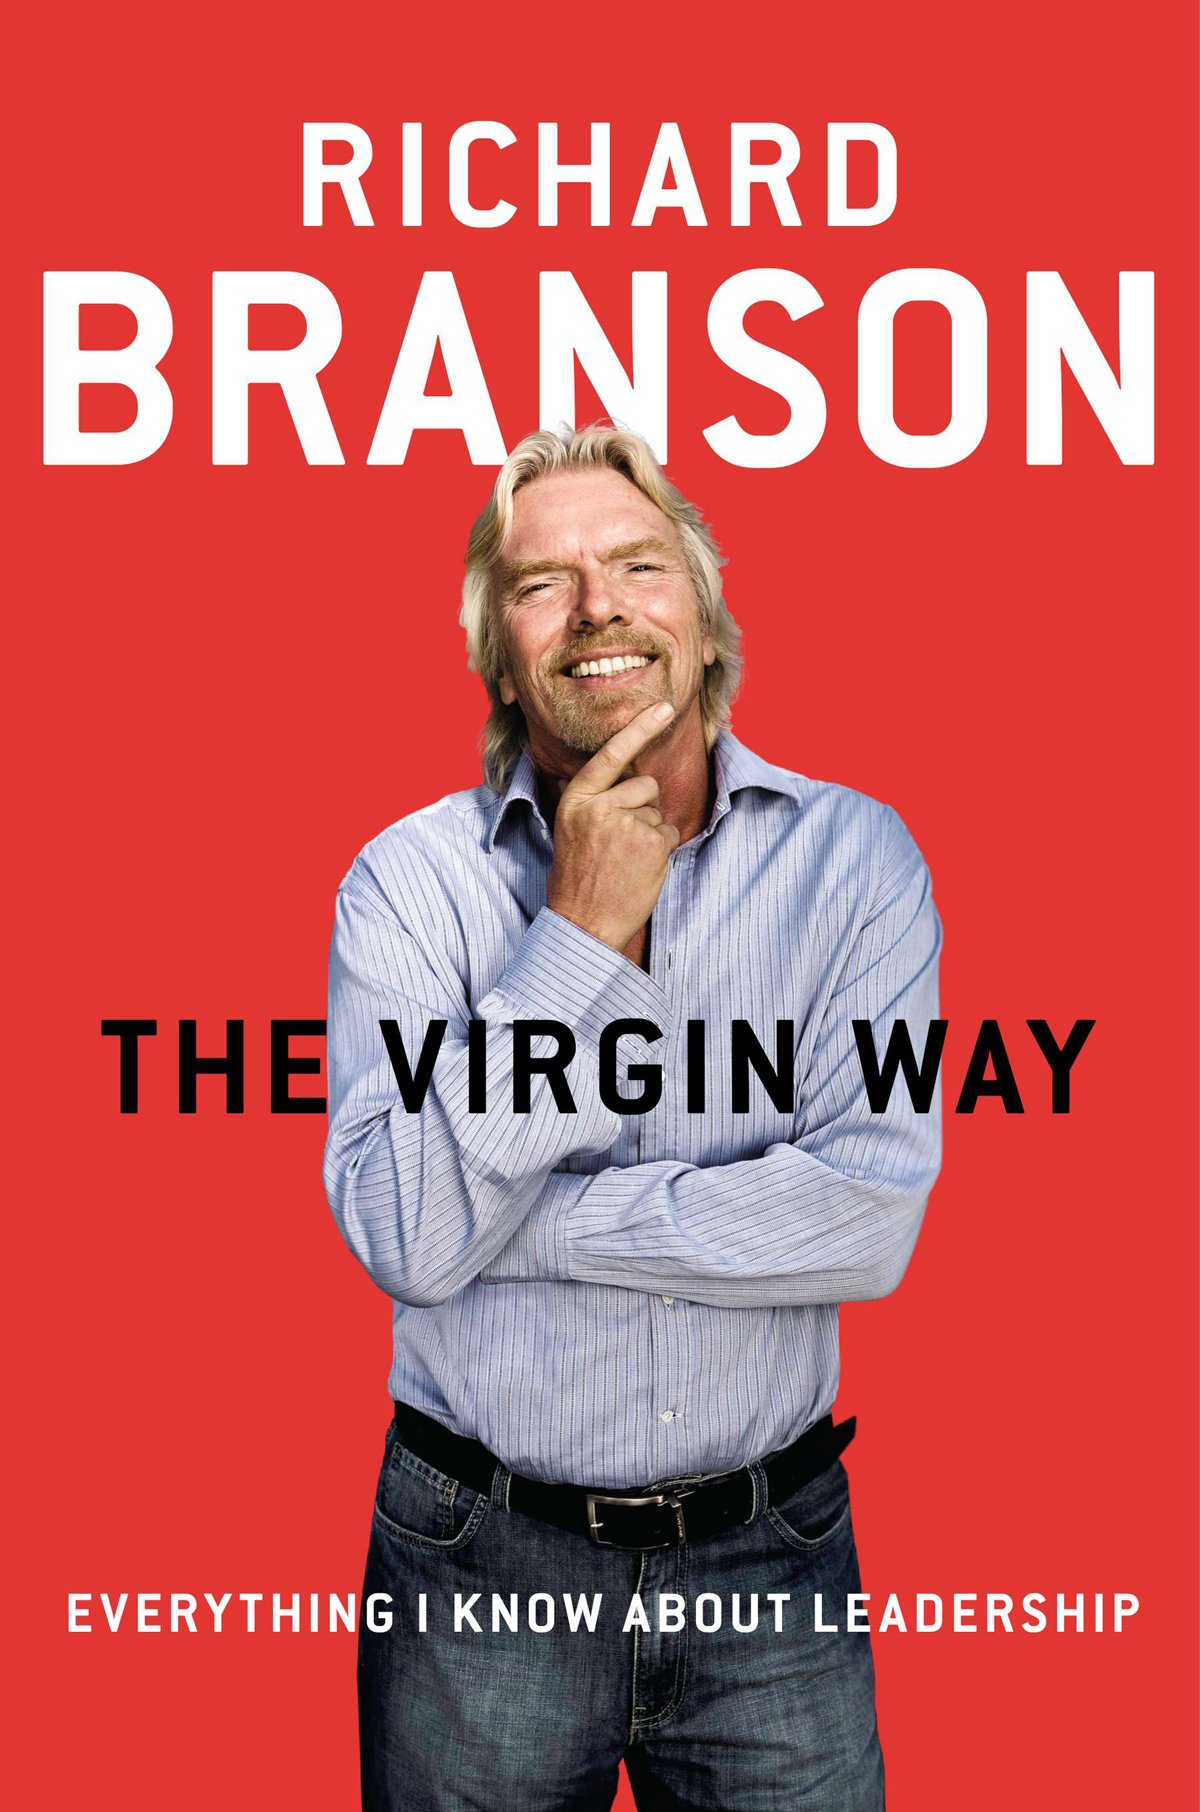 Can you use and share stories like Richard Branson?